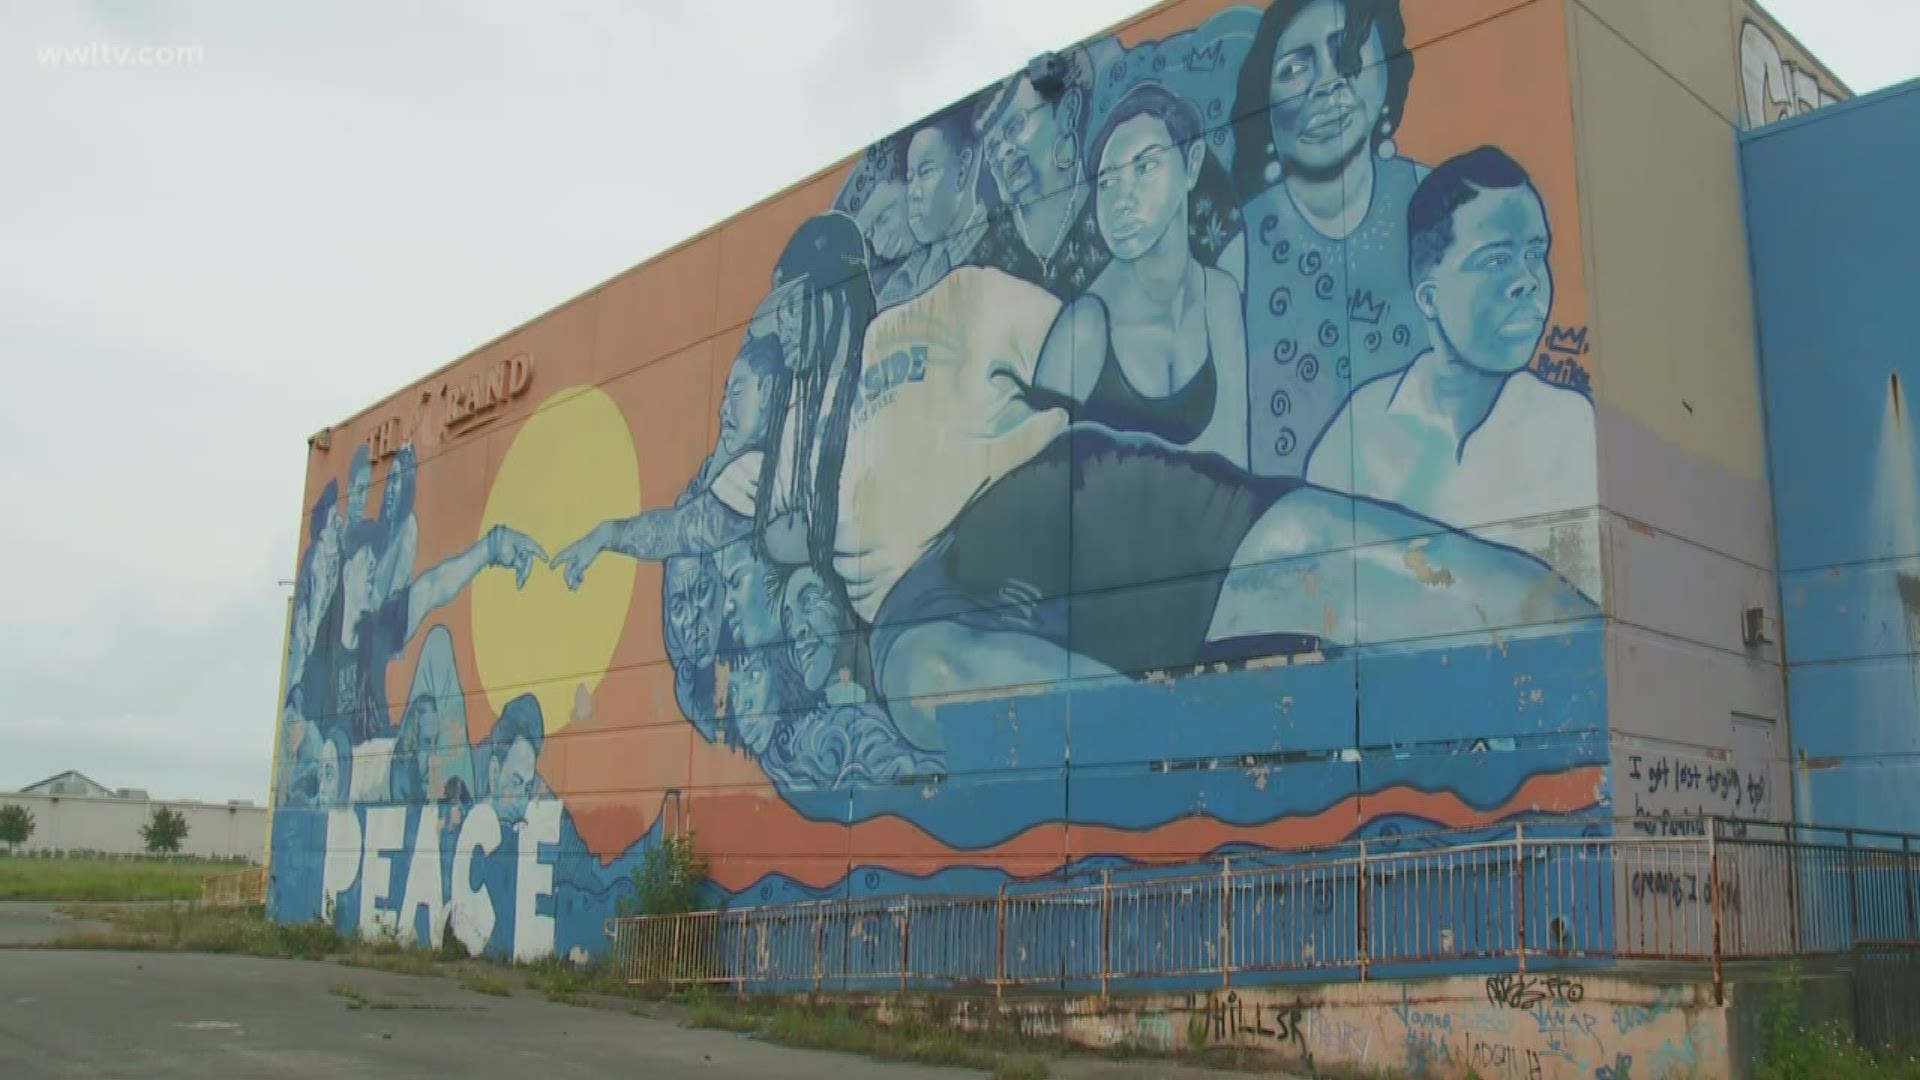 While the Grand Theater has been abandoned since Katrina, in recent years the building has gained attention for its massive mural visible from I-10.